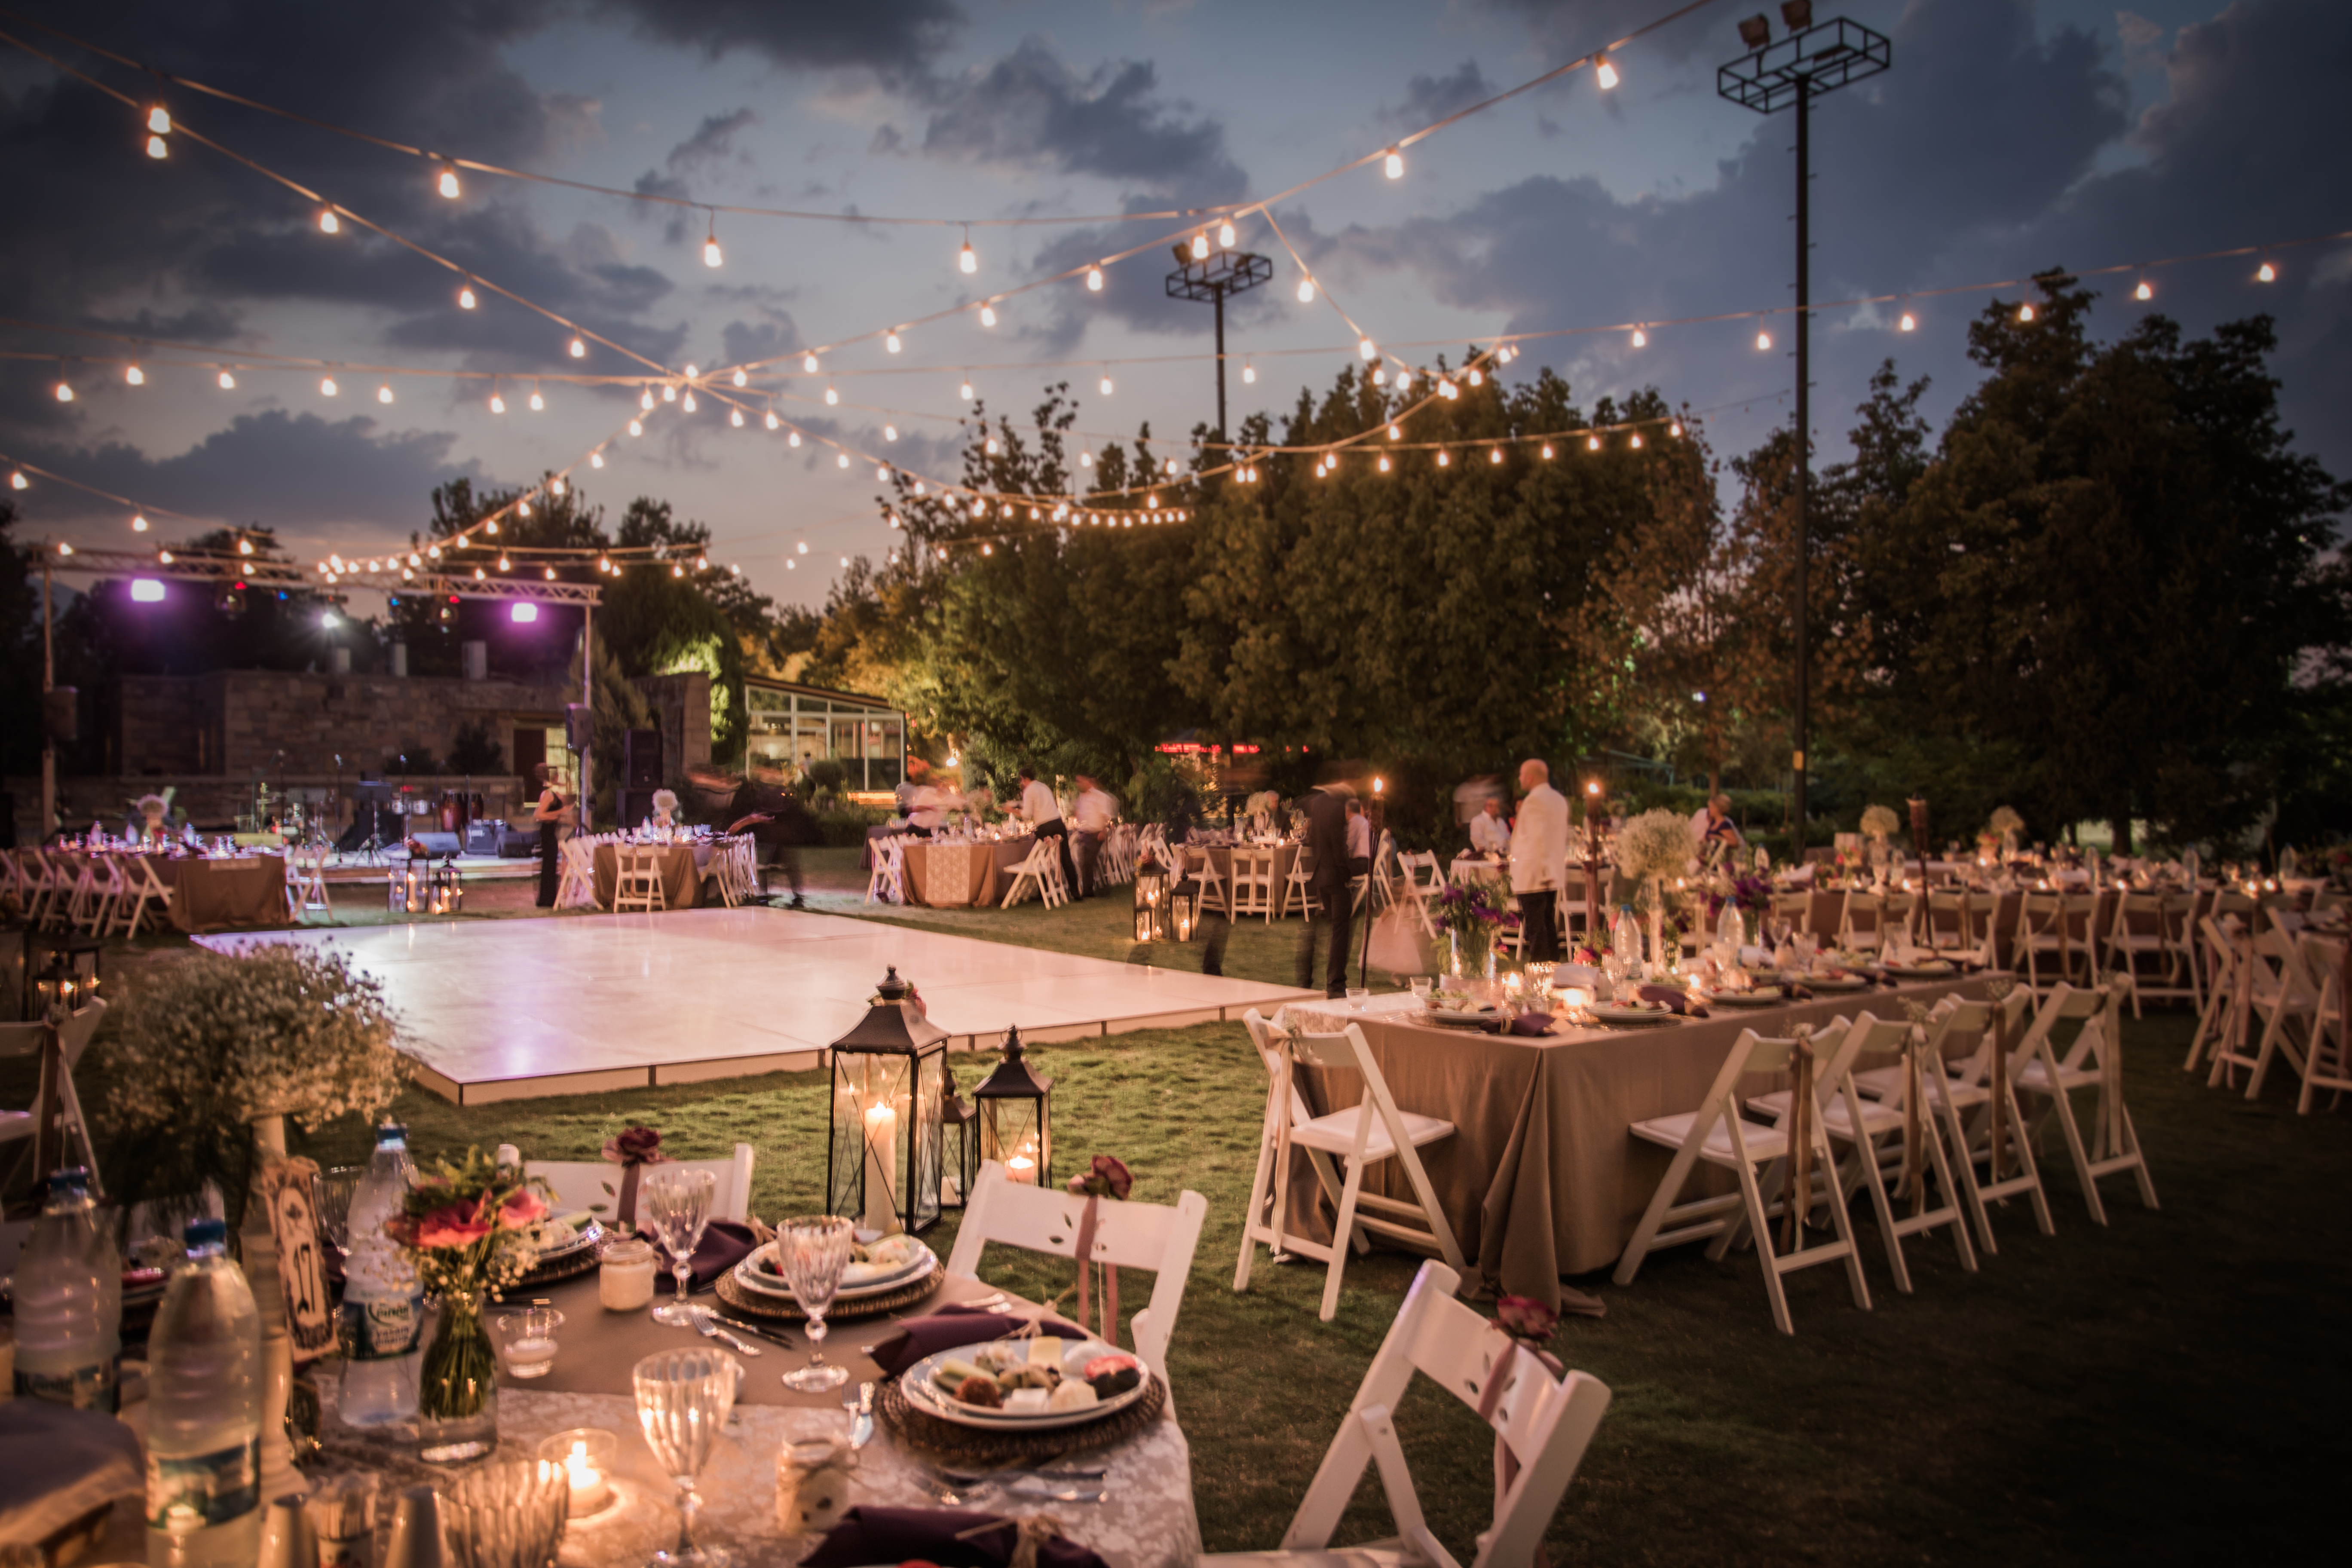 A wedding reception set with twinkling lights and tables | Source: Shutterstock